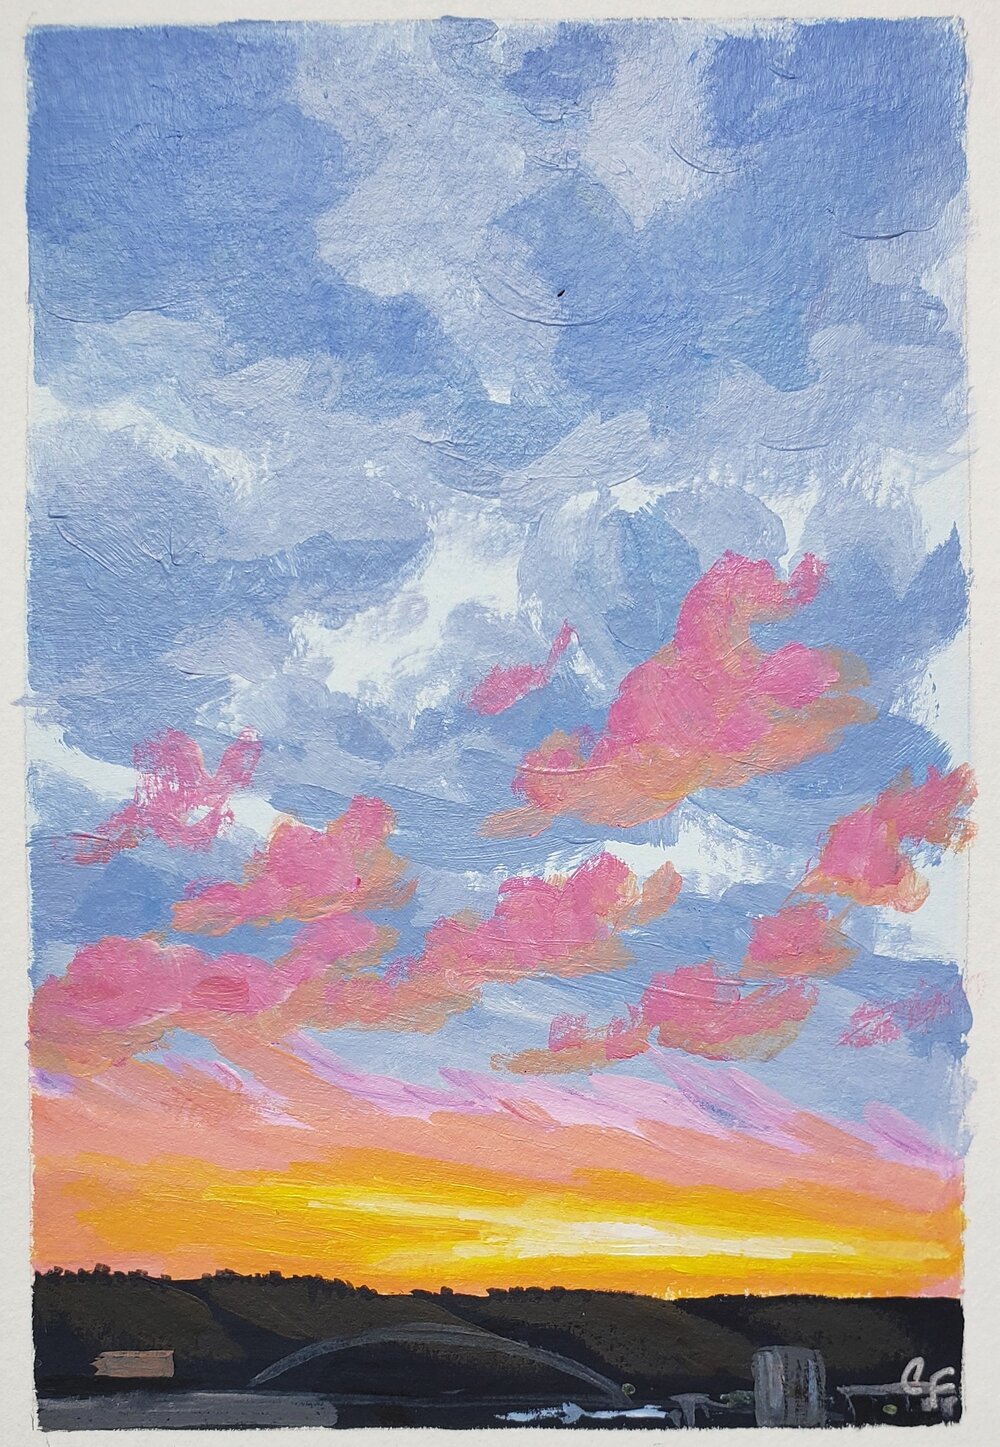 Sunset over the West Hills #3 - 6"x4"